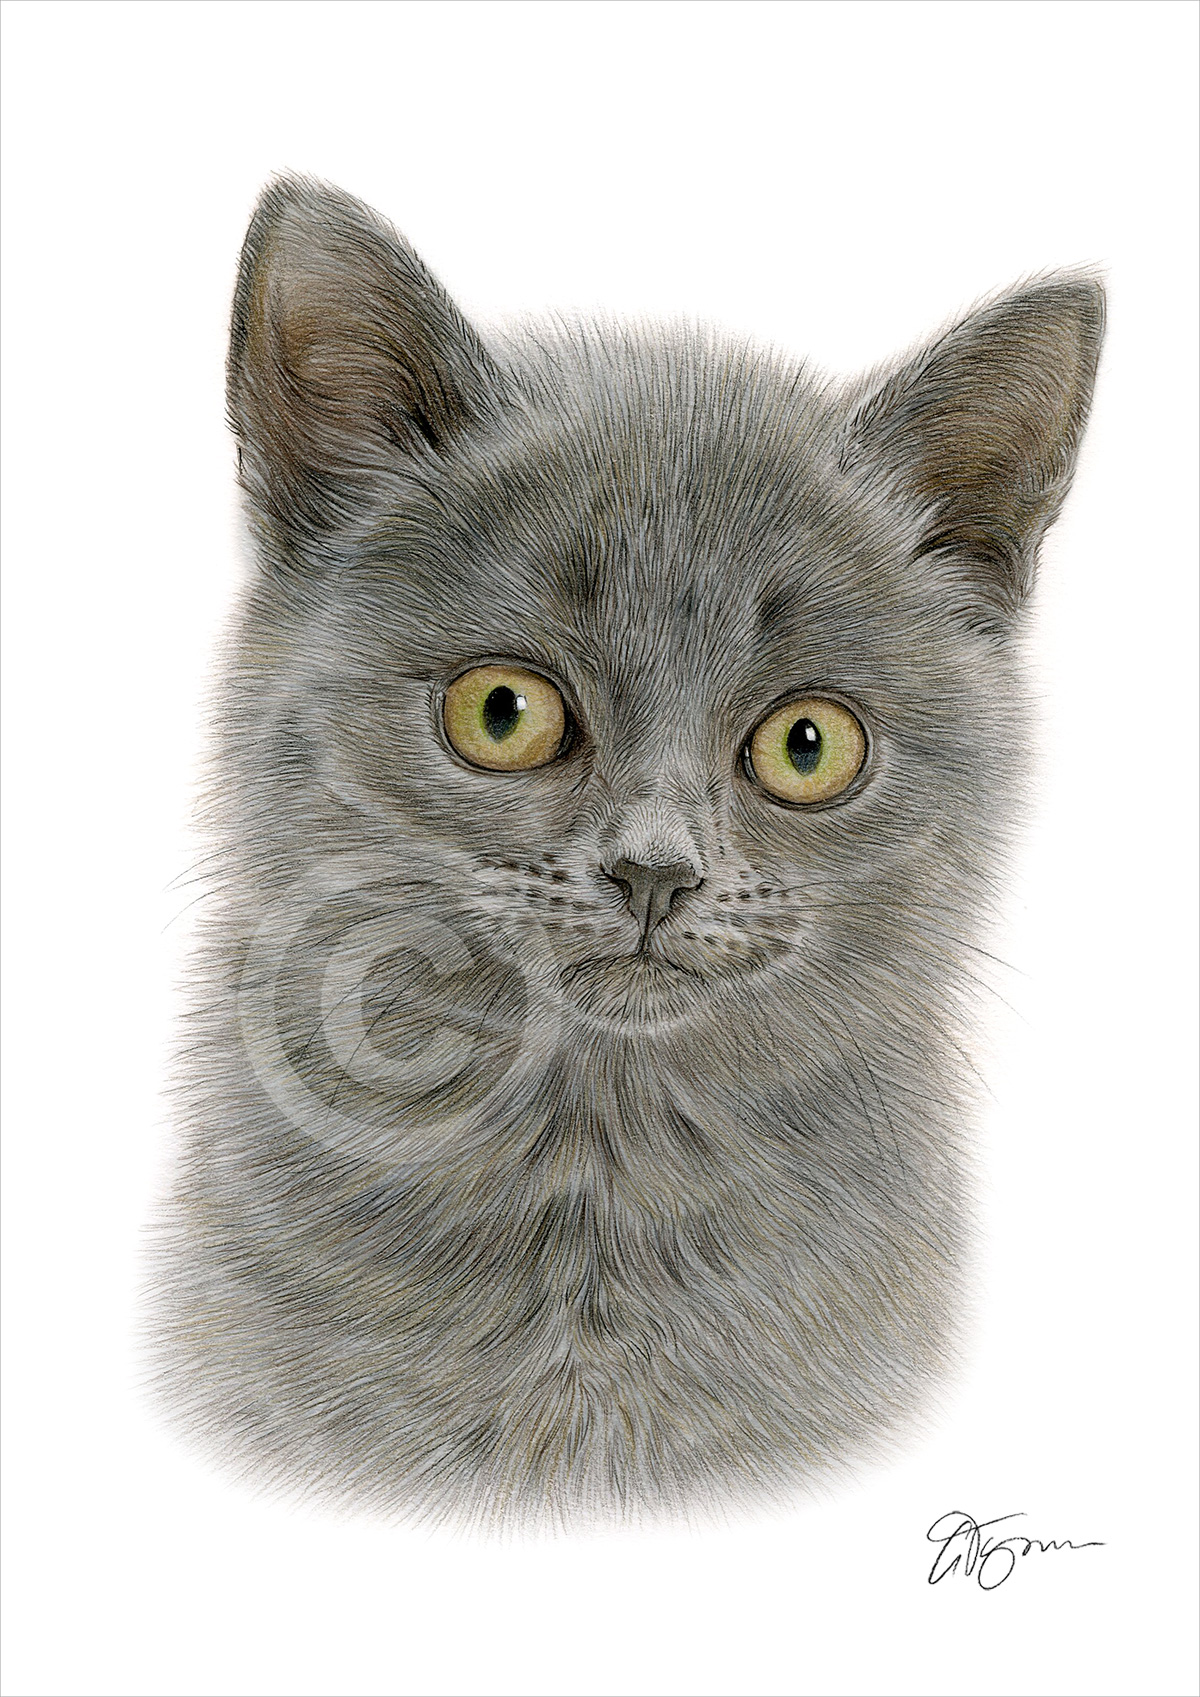 Colour pencil drawing of a young dark grey cat by artist Gary Tymon